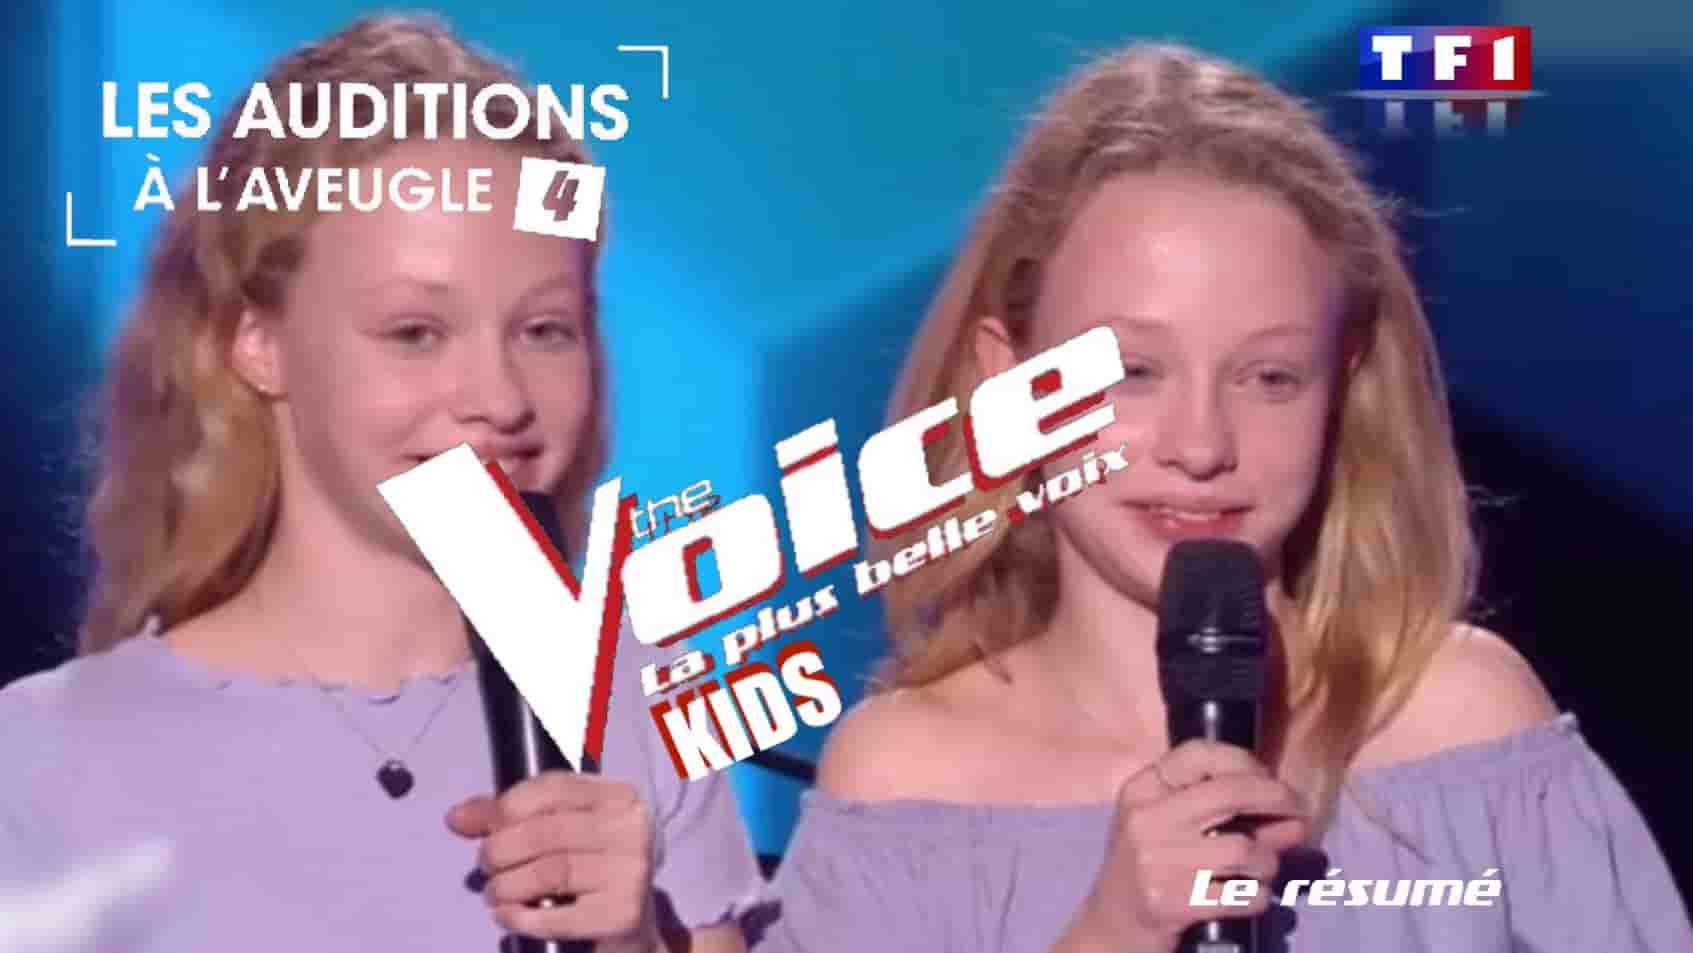 The Voice Kids 5 : Auditions n°4 - ©/-\ll in One TV, All rights reserved. Do not copy. Reproduction Interdite